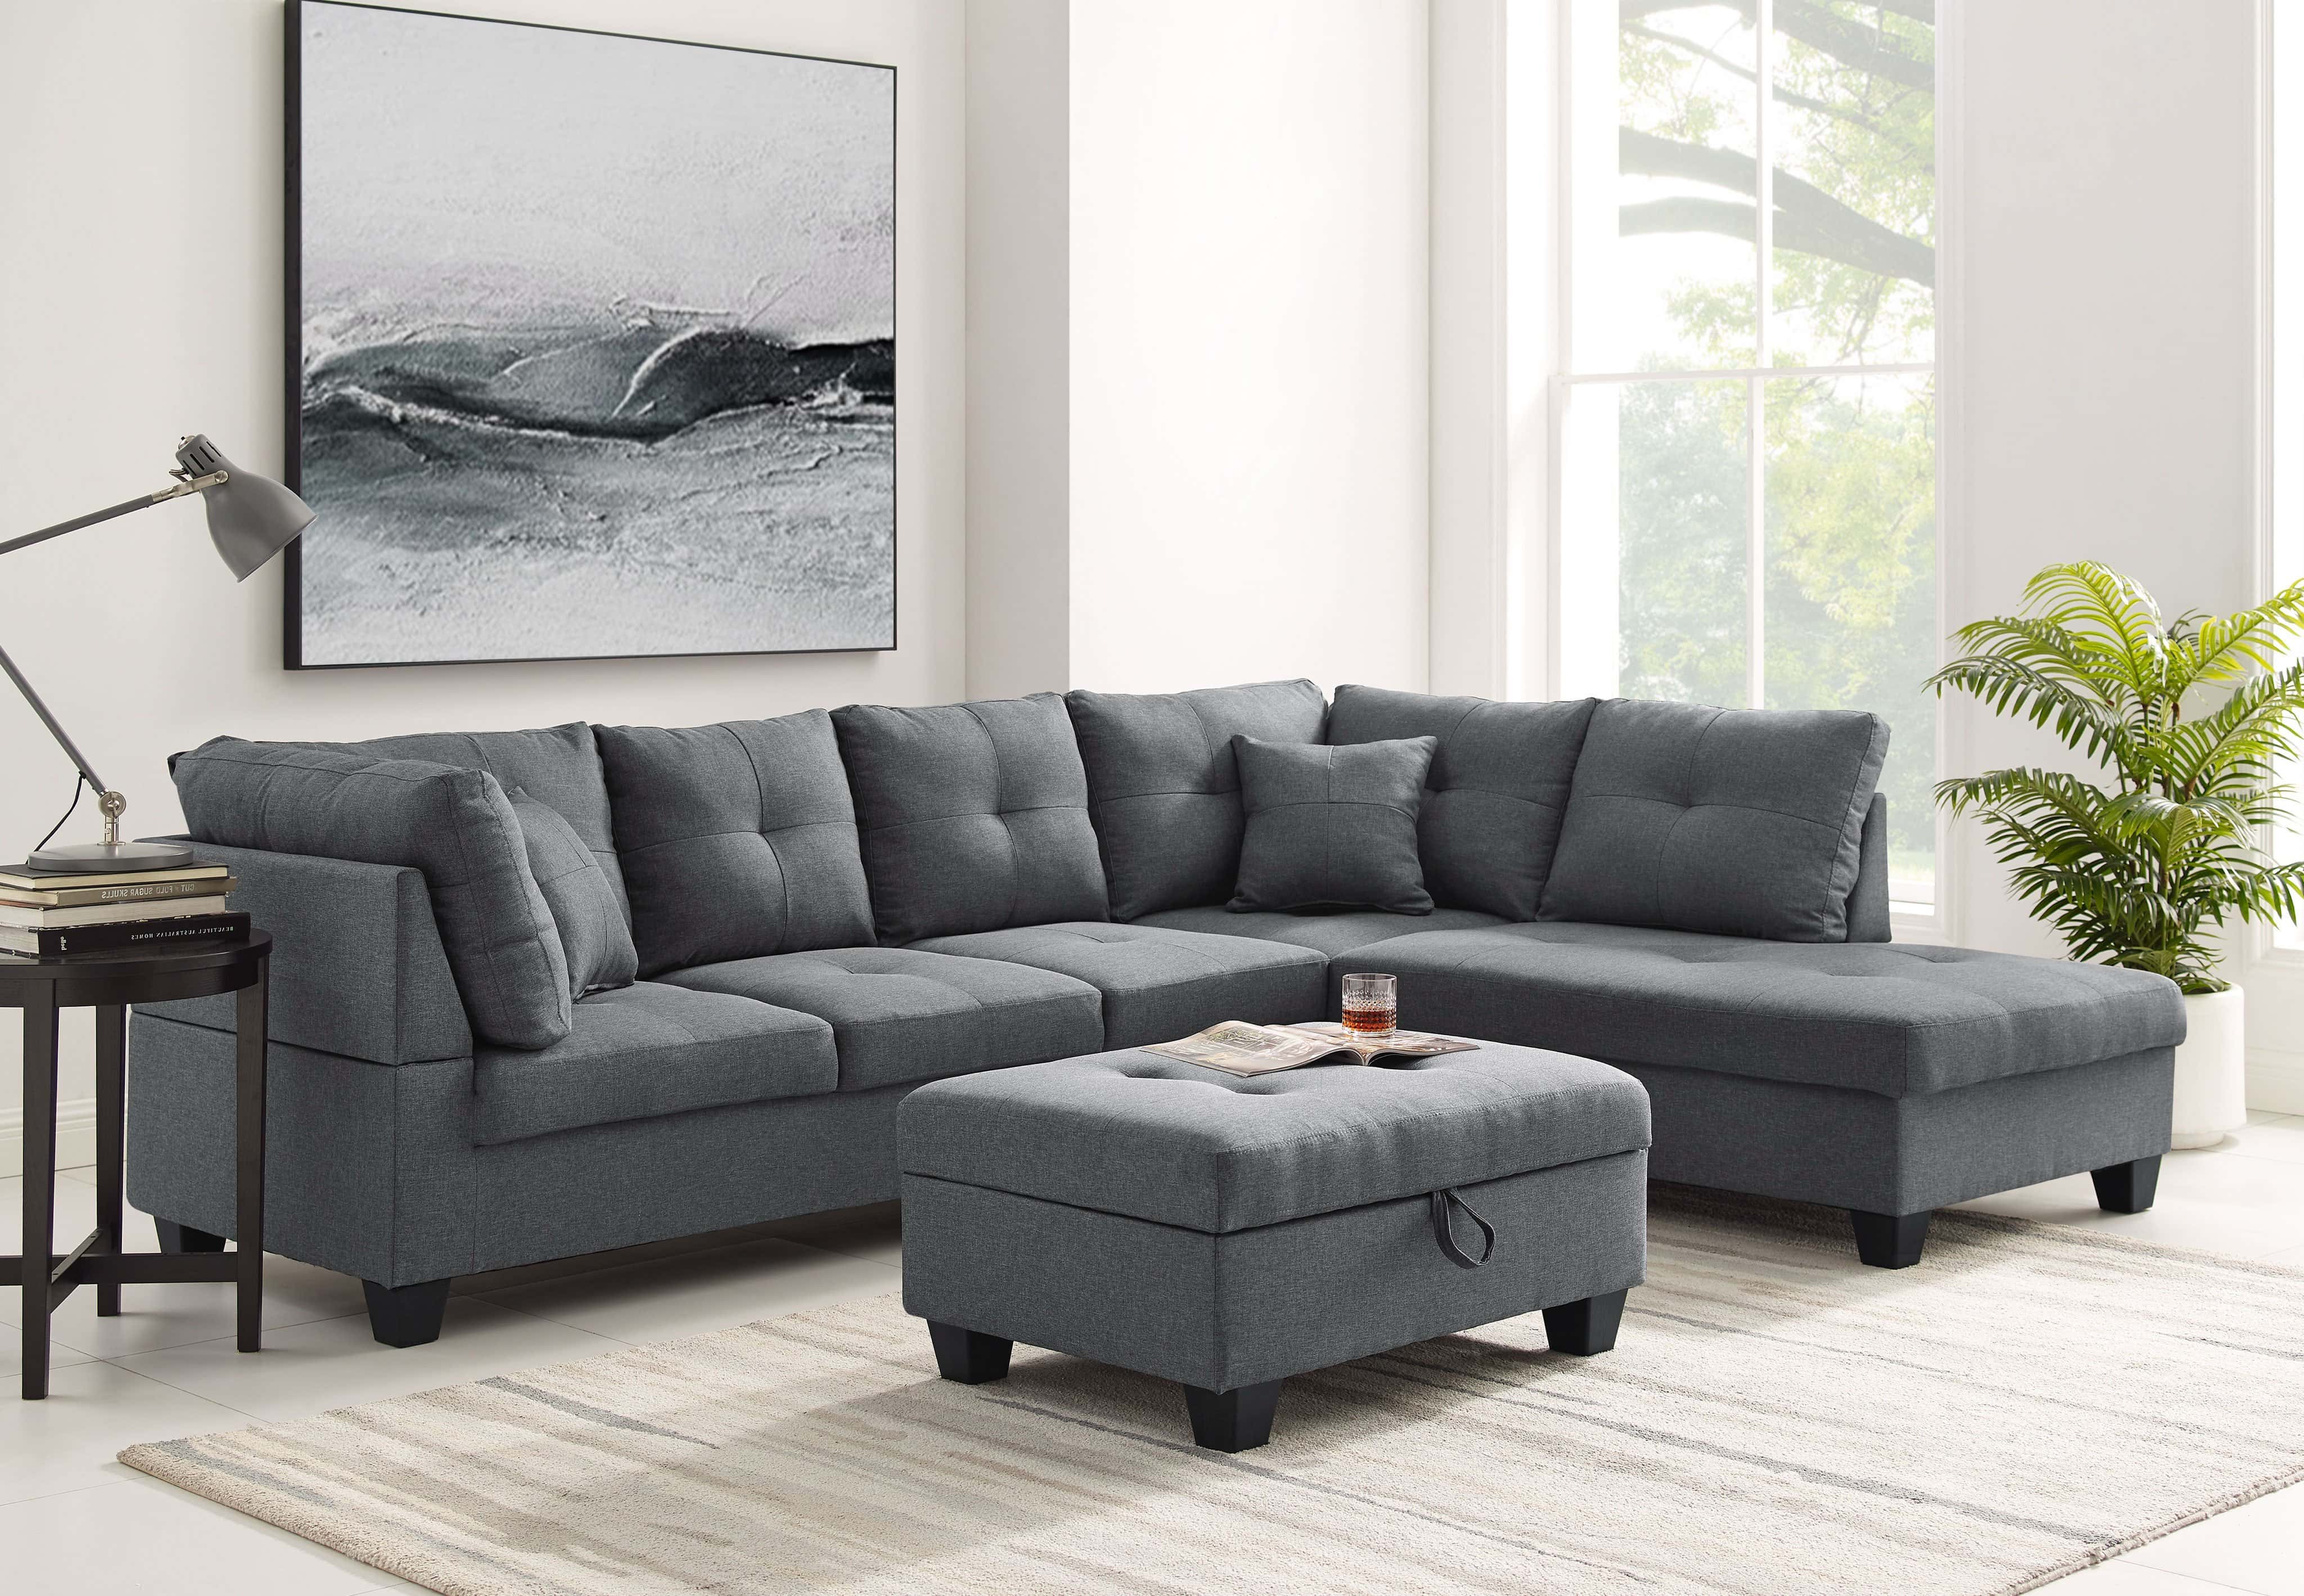 Floor Sample Spencer Dark Gray Sectional with Storage Ottoman by Prestige  Furnishings